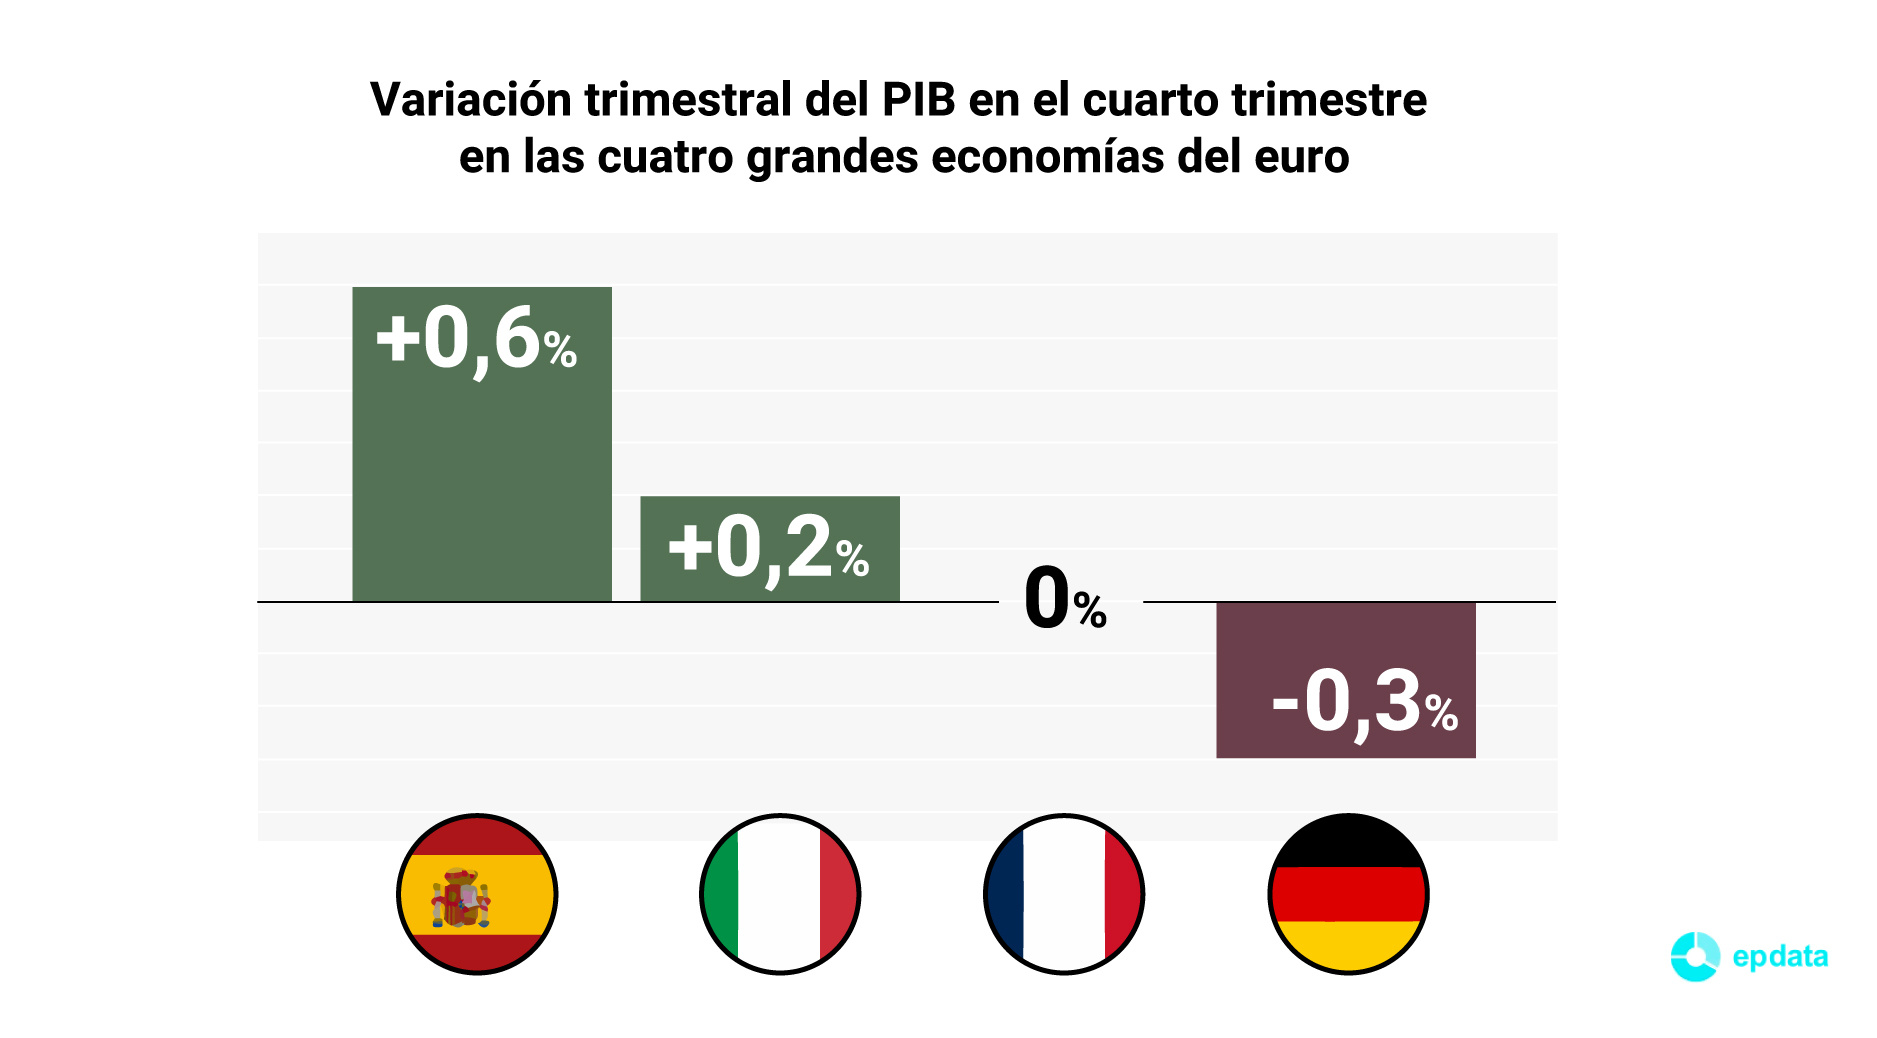 Spain (0.6%) led growth among the large euro economies at the end of 2023